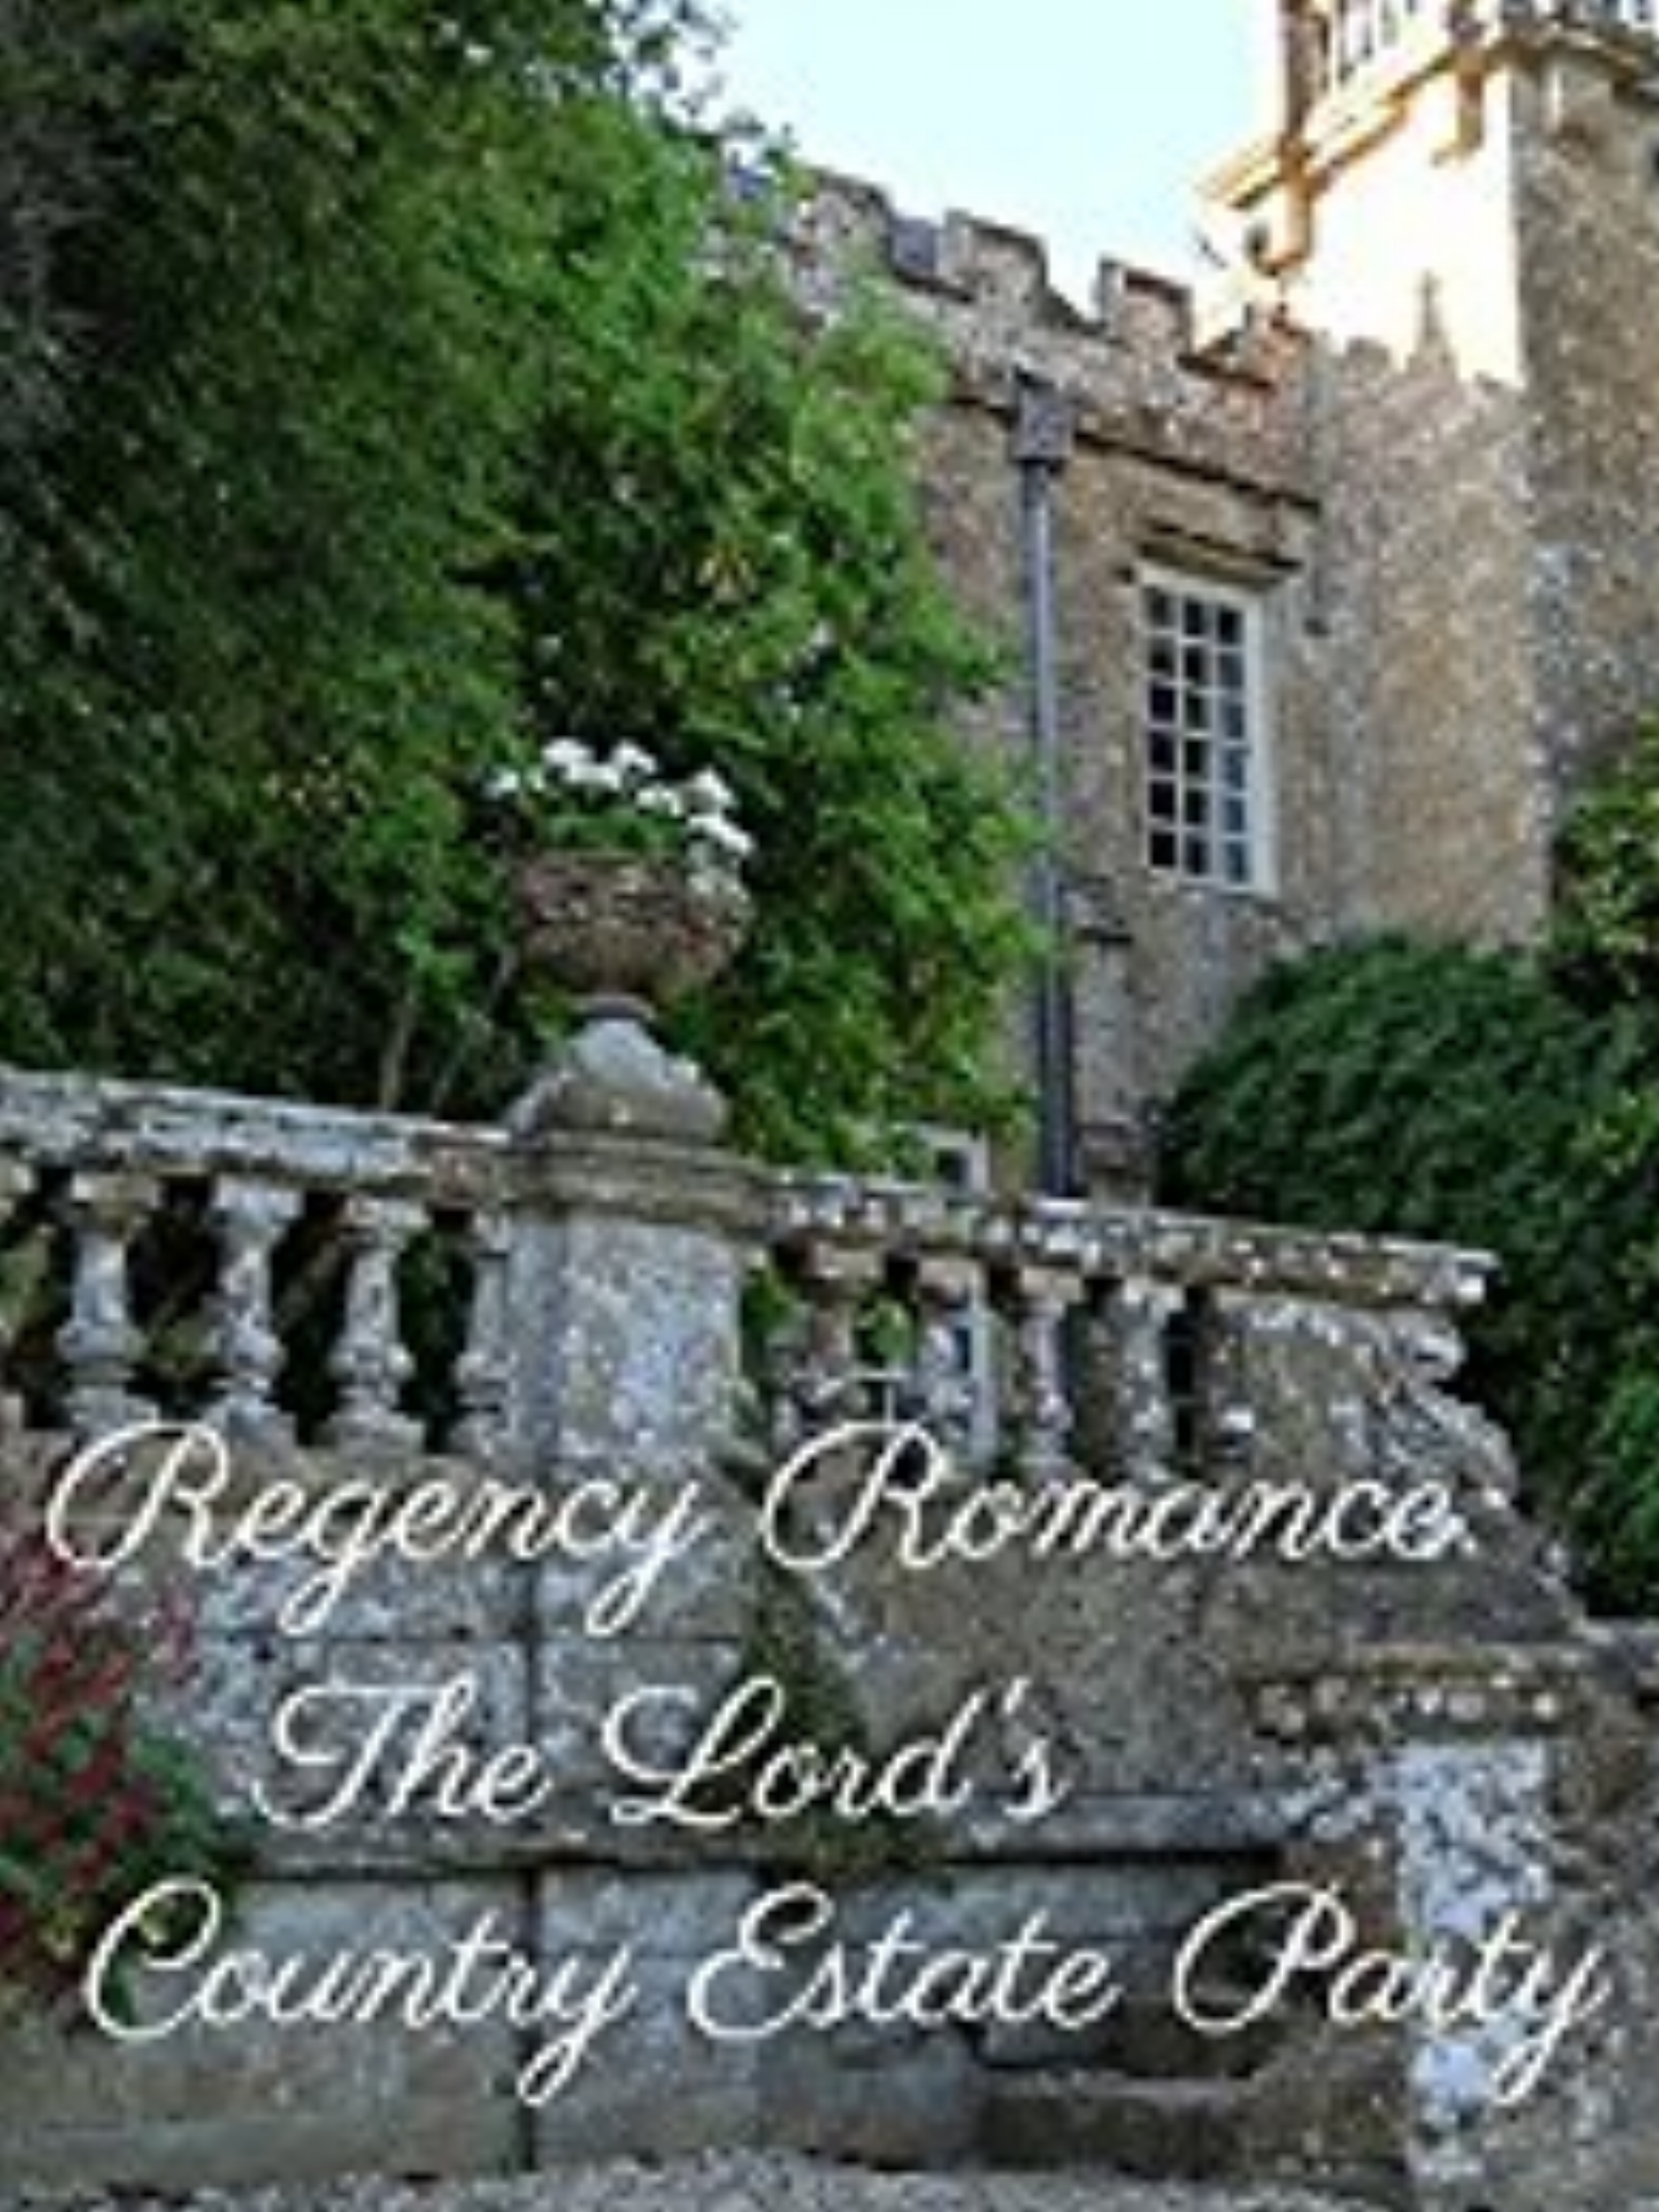   Regency Romance: The Lord's Country Estate Party   Written by Paige Millikin, Published by ELJ Publishing   ROLE:  Narrator 